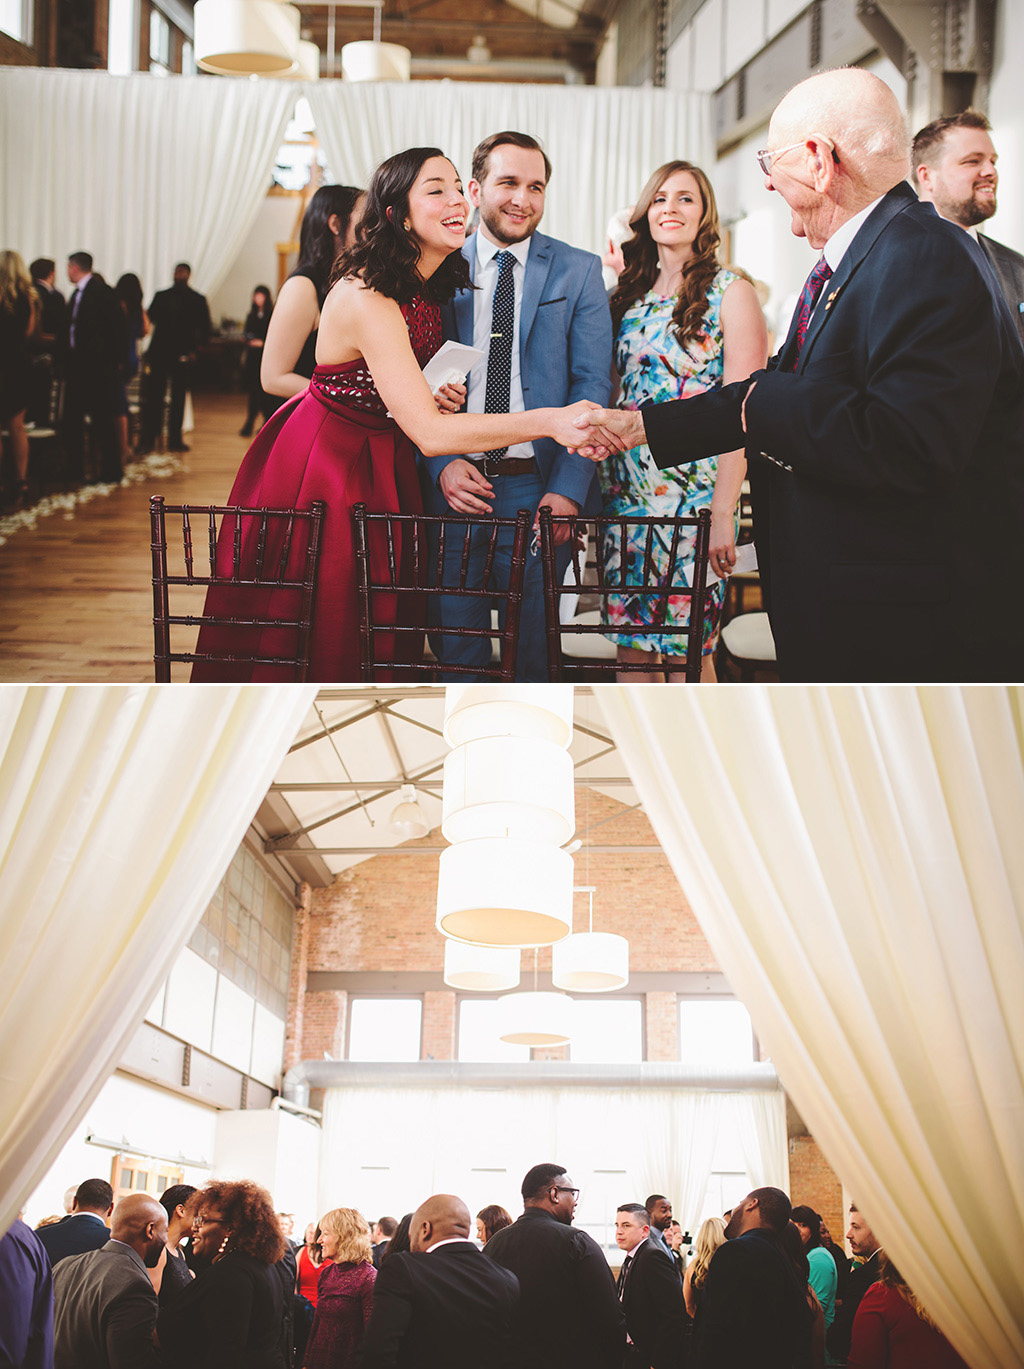 A city wedding in chicago